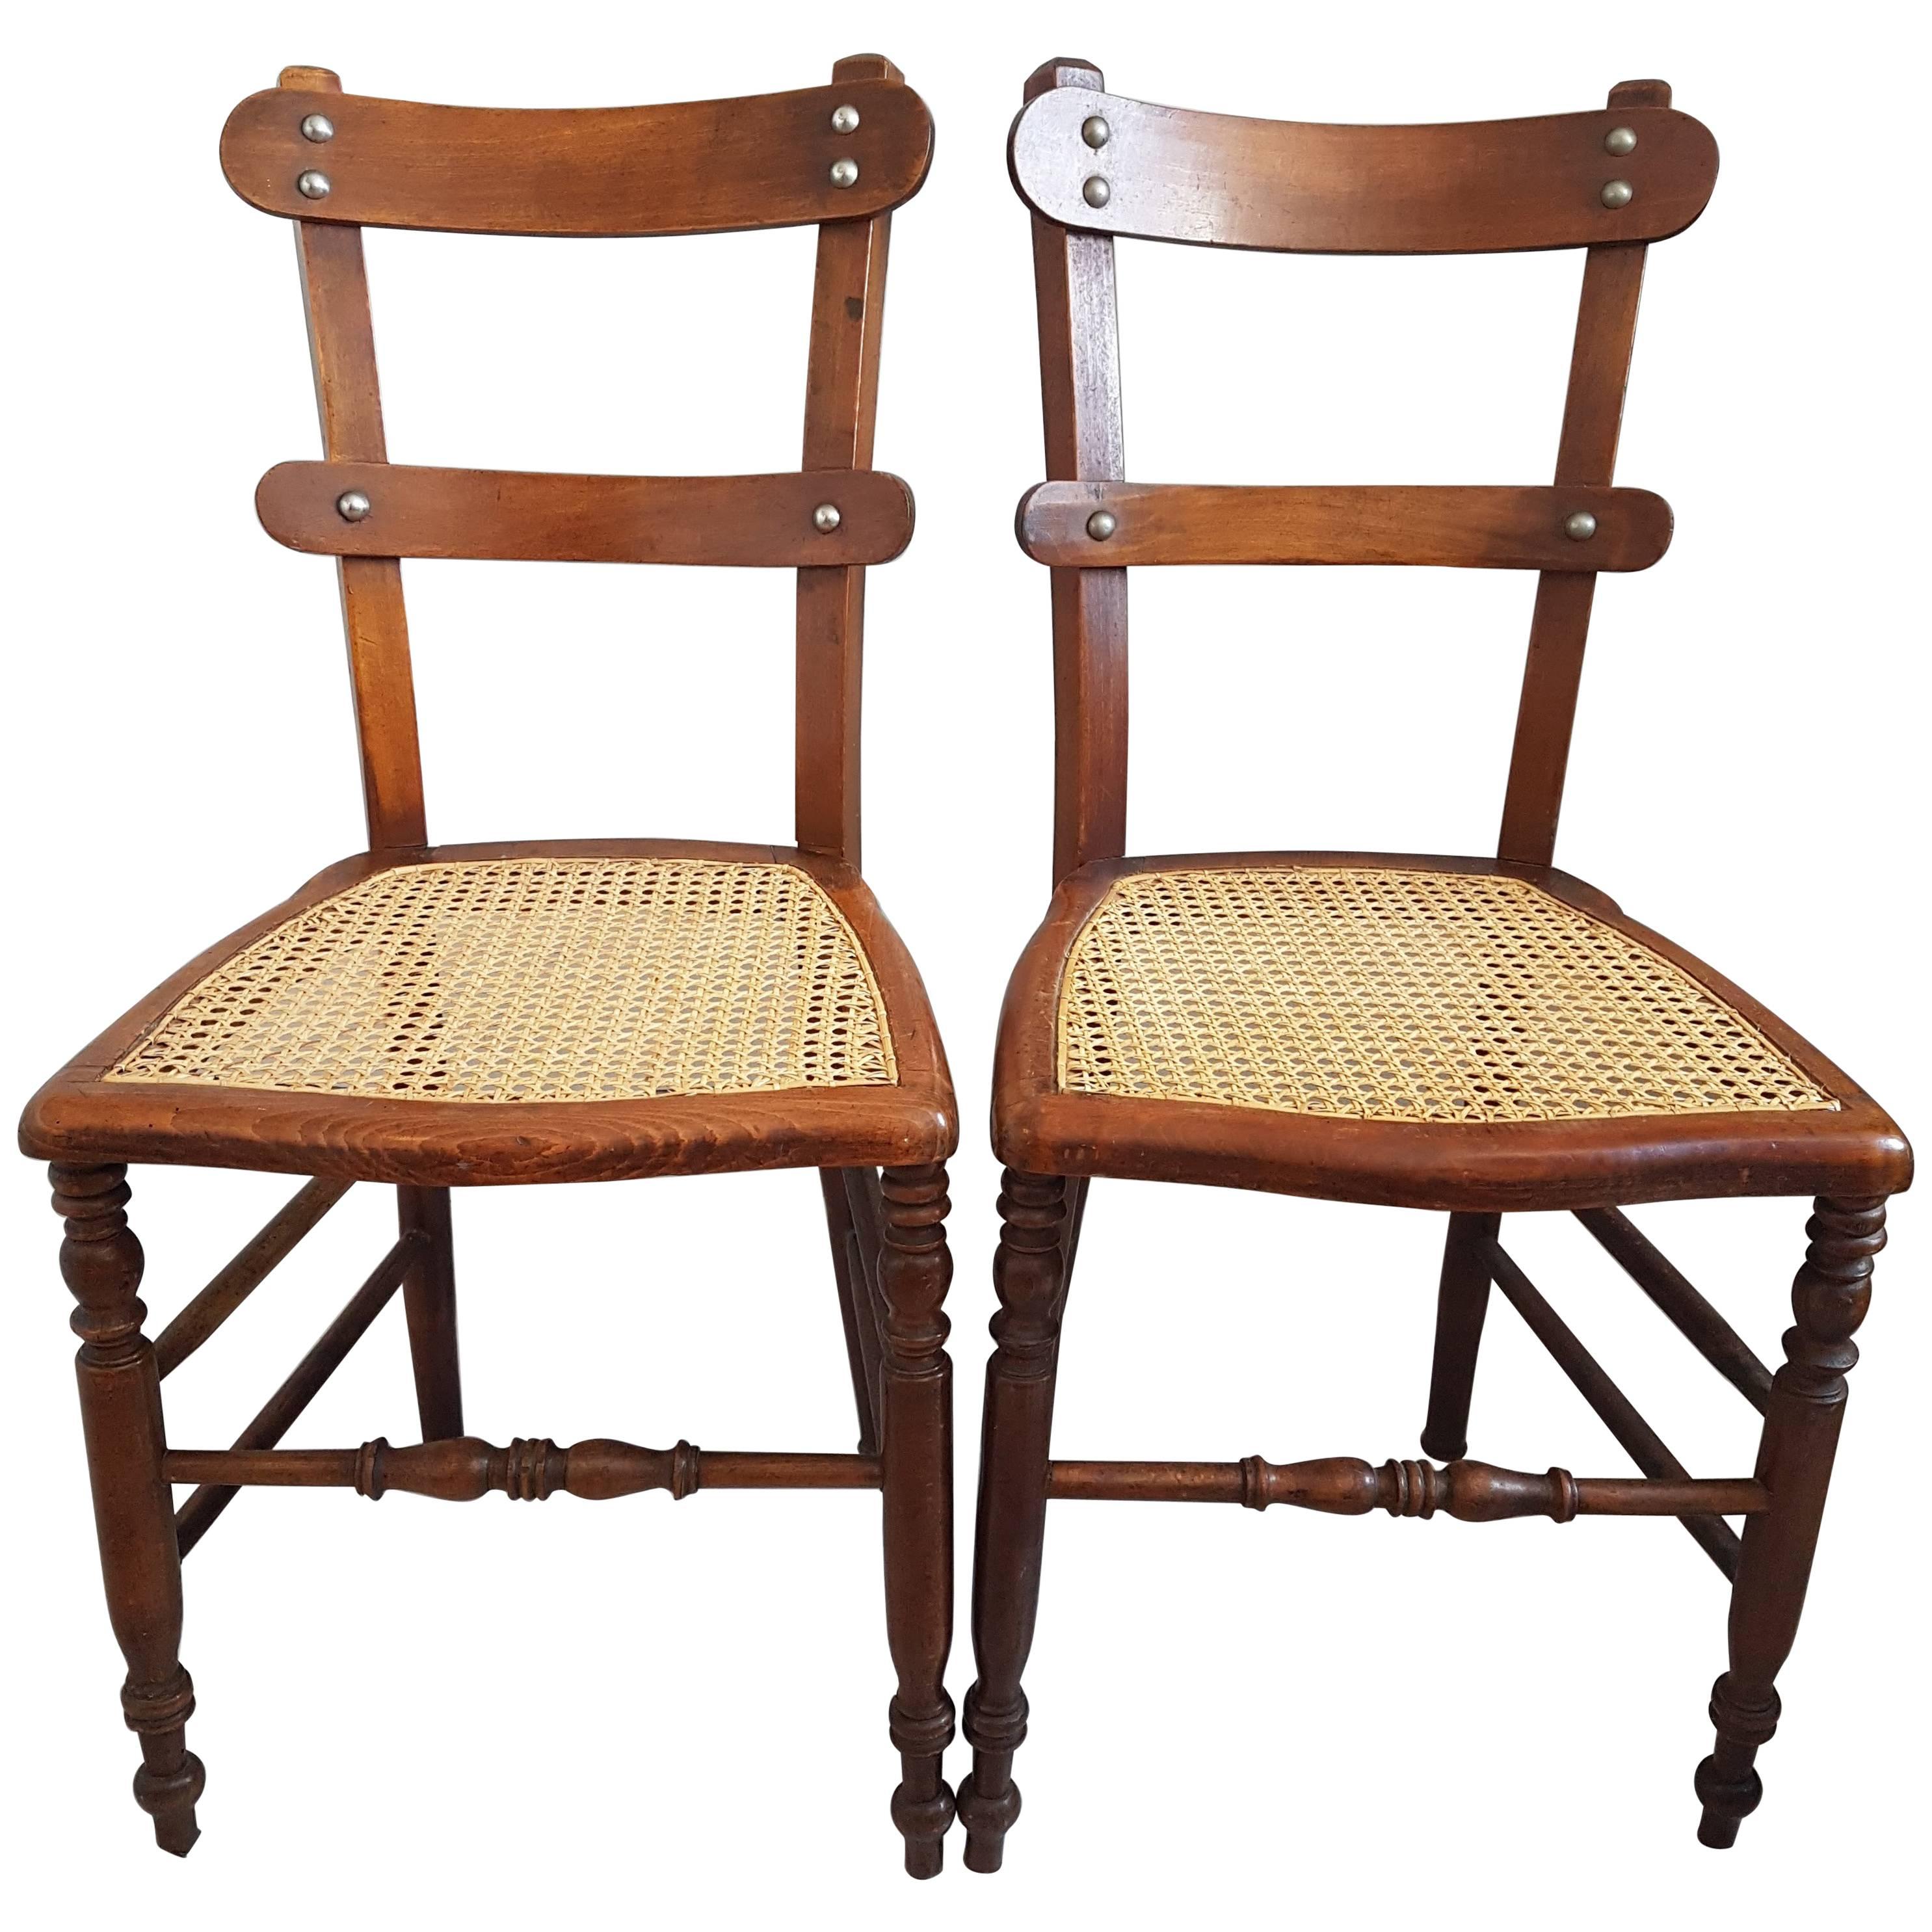 Pair of French Provincial Caned Chairs